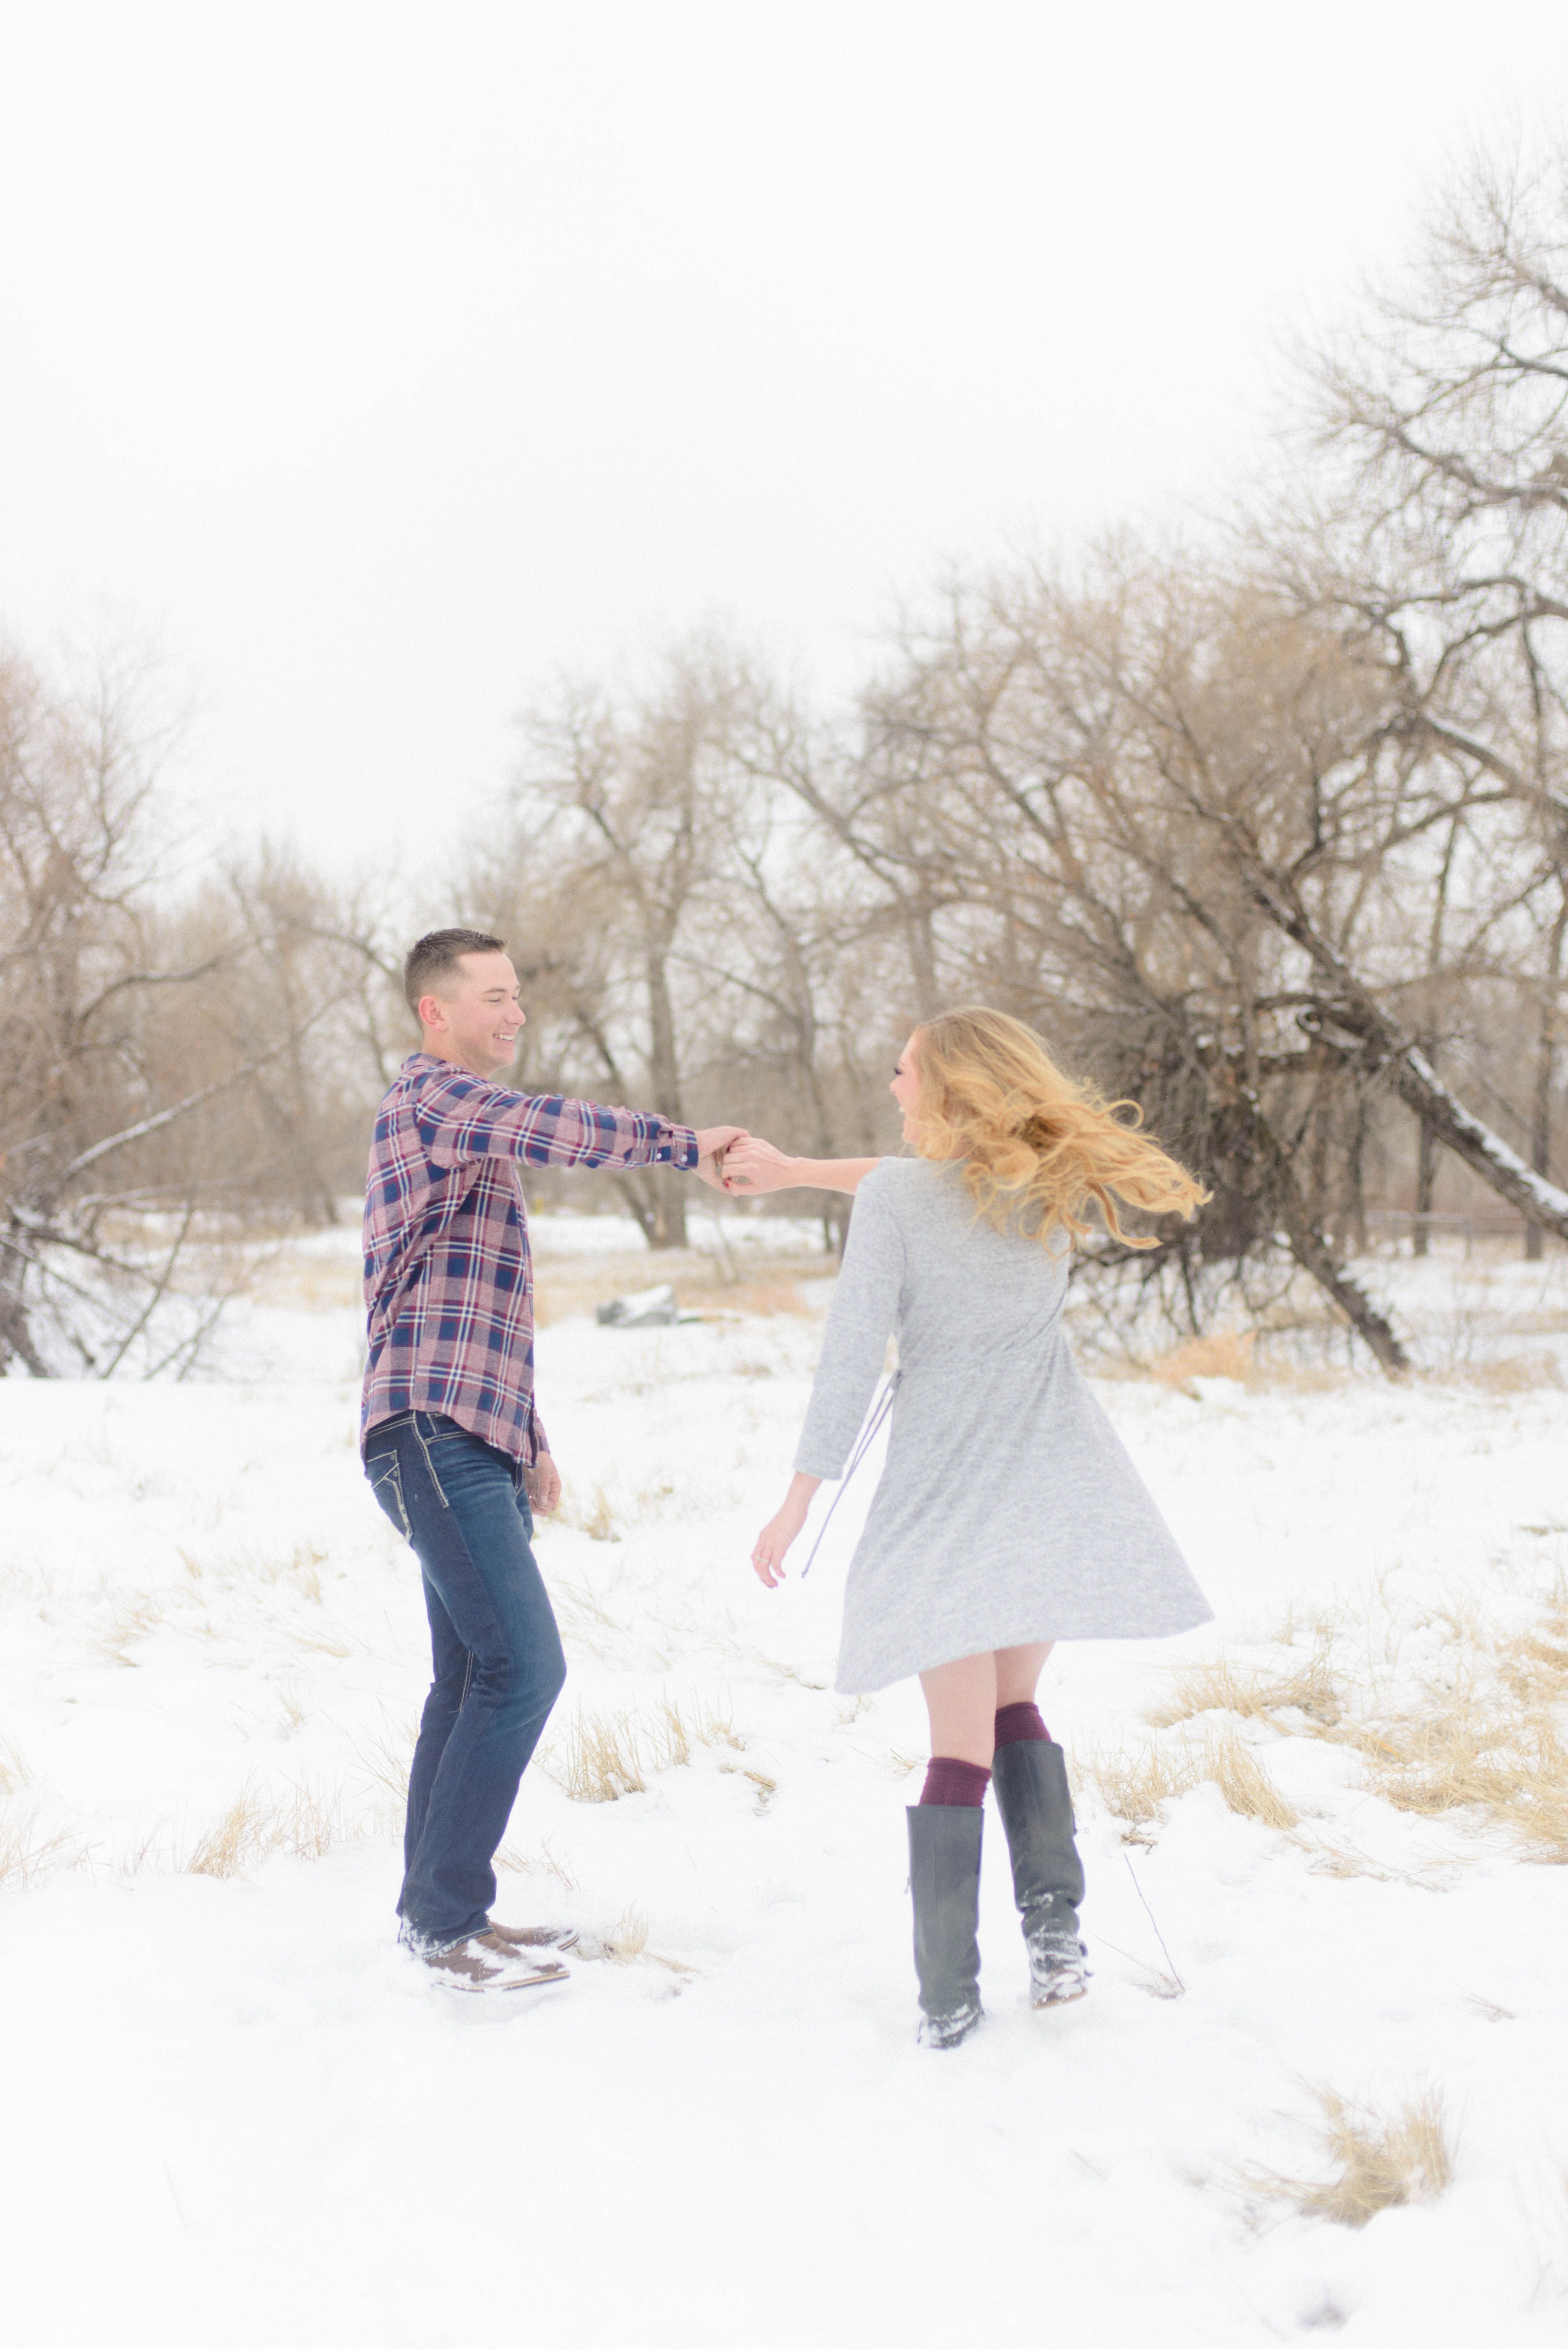 Dancing in the snow engagement photos winter | Engagement Shoot ...